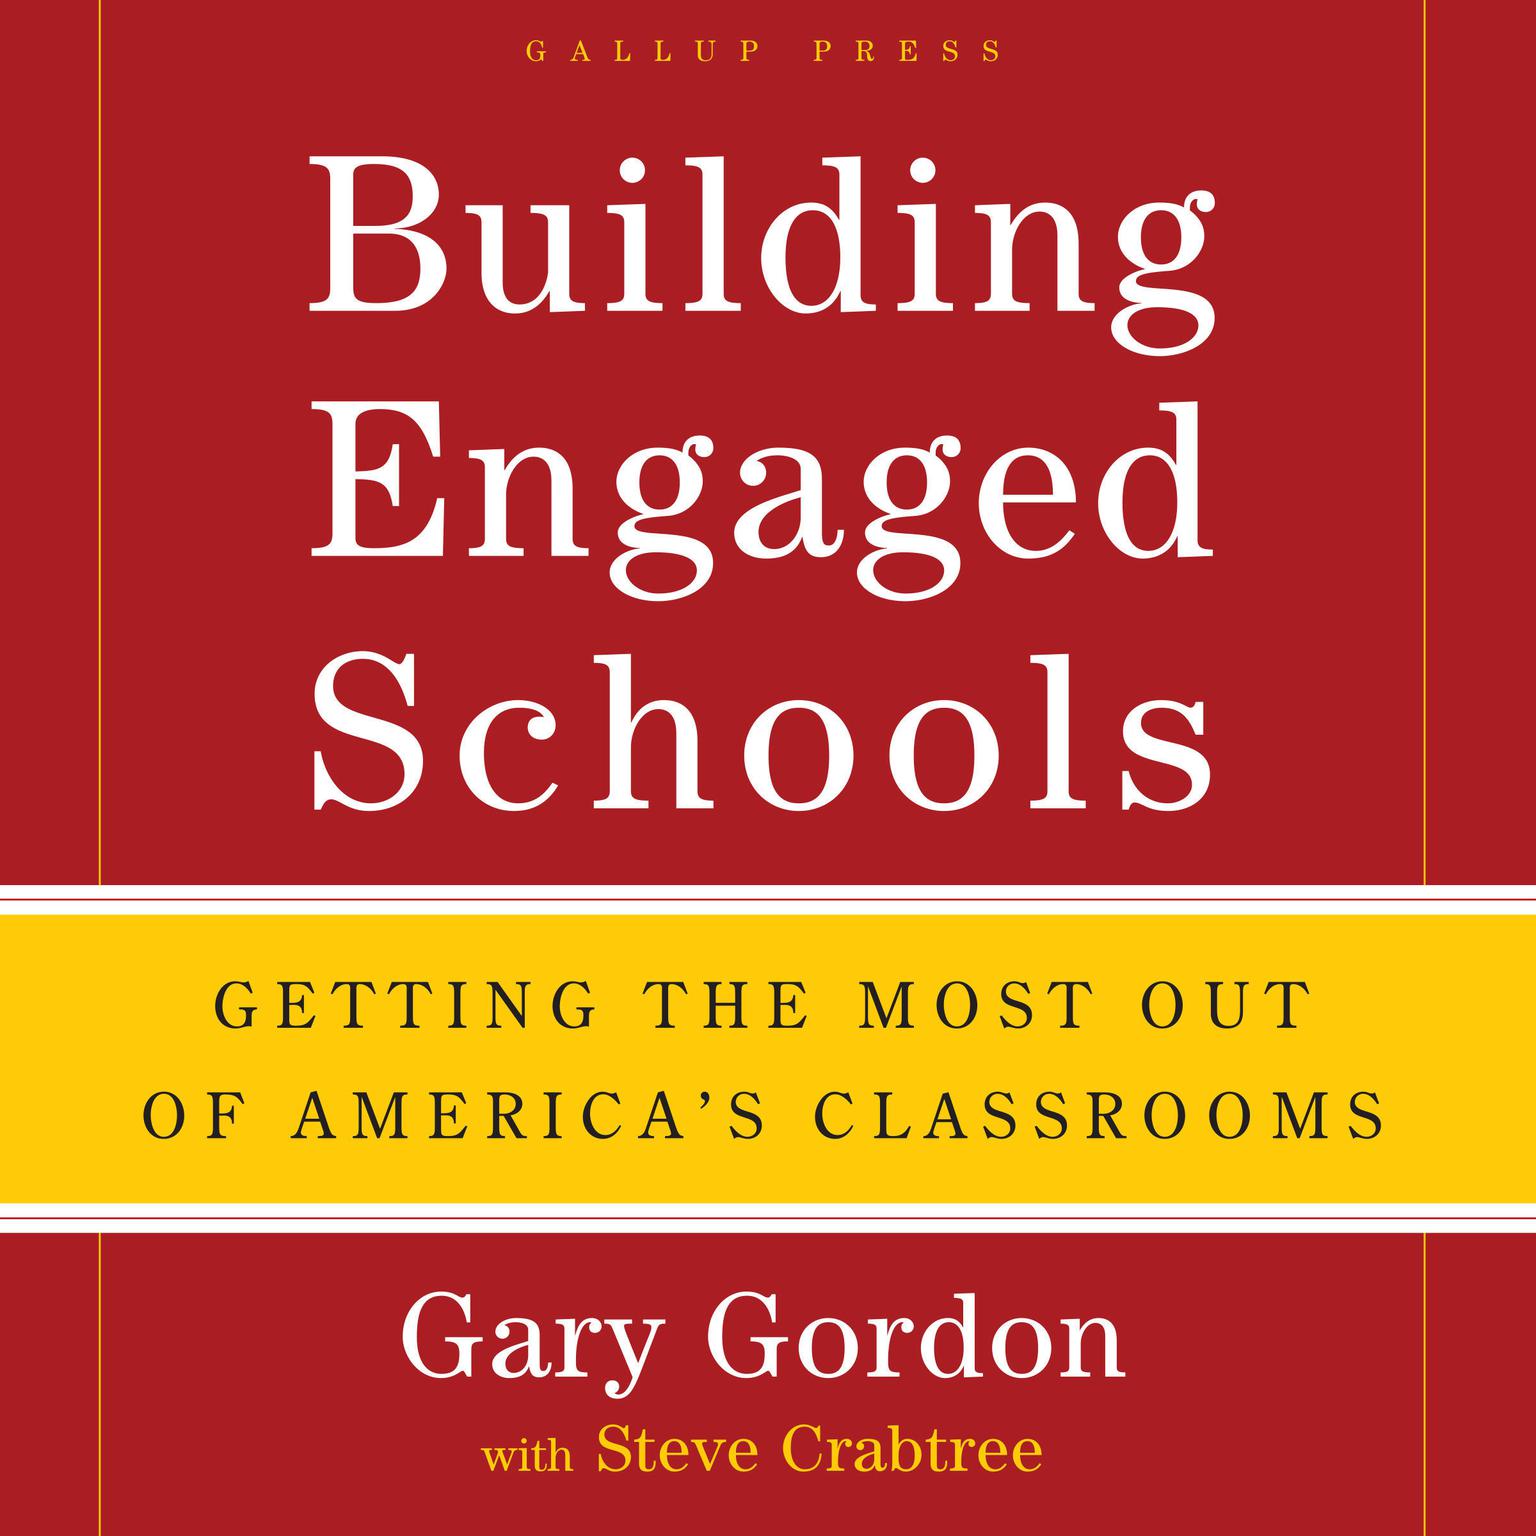 Building Engaged Schools: Getting the Most Out of Americas Classrooms Audiobook, by Gary Gordon